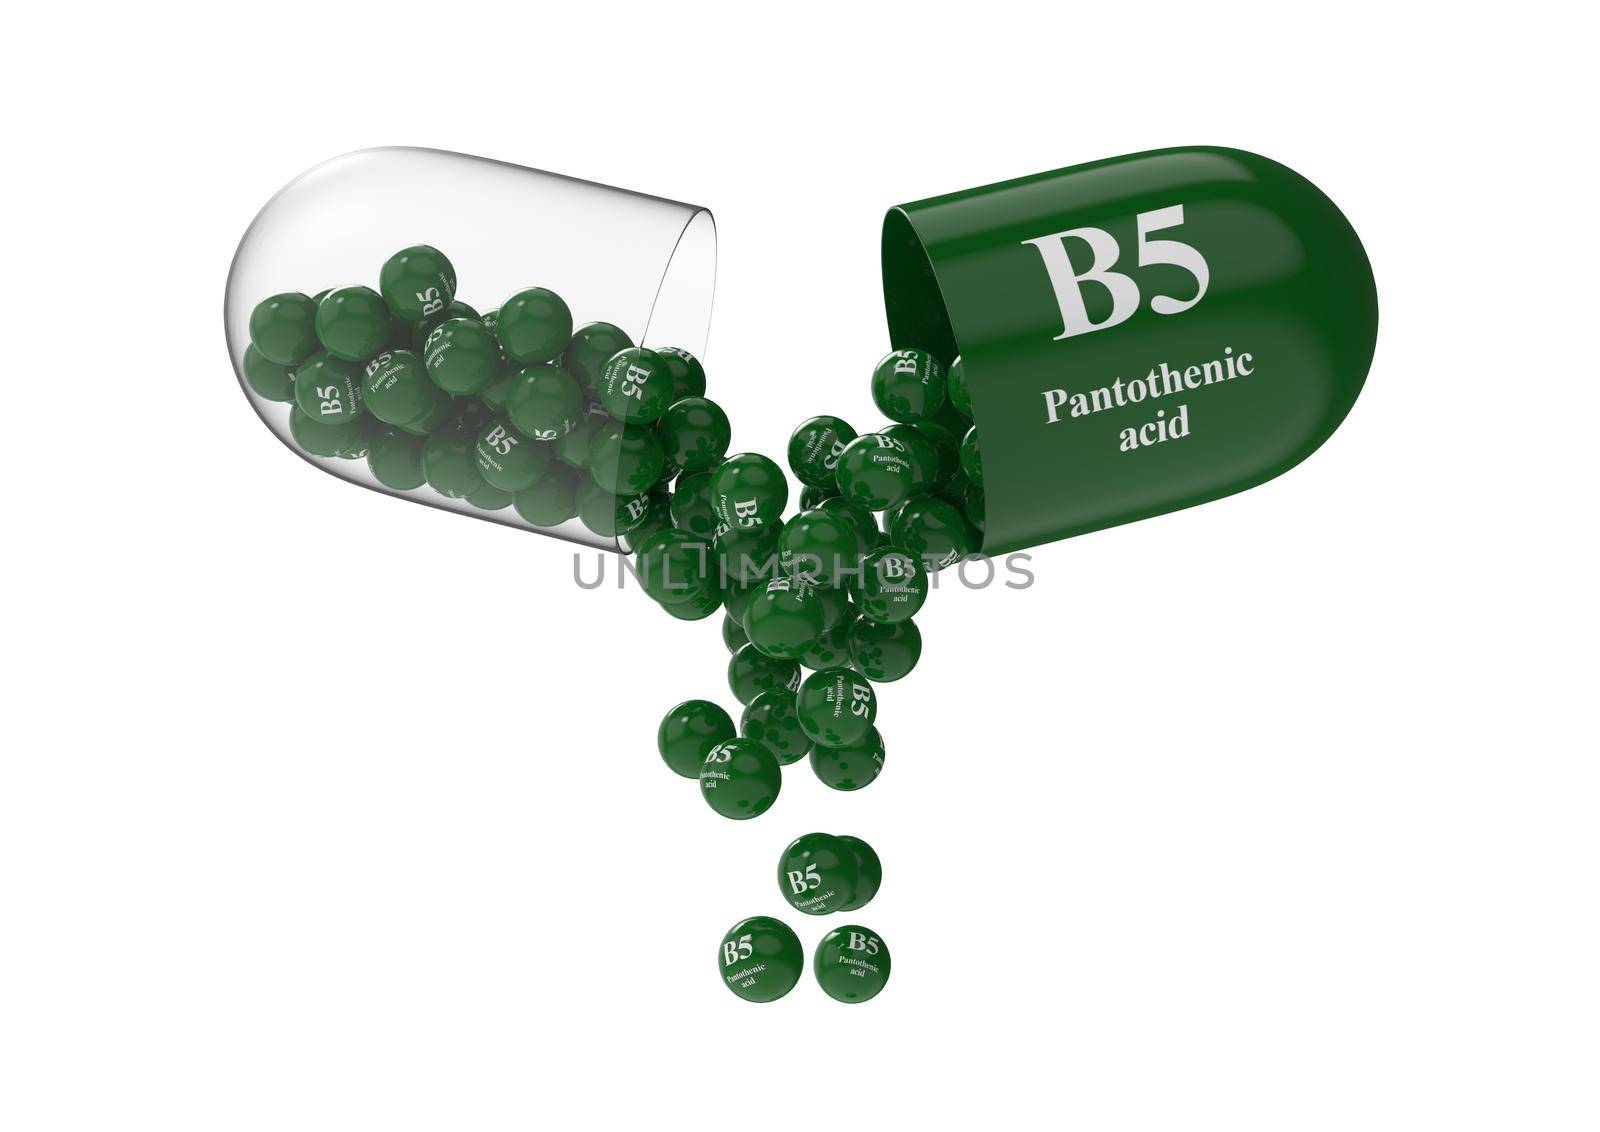 Open capsule with b5 pantothenic acid from which the vitamin composition is poured. Medical 3D rendering illustration